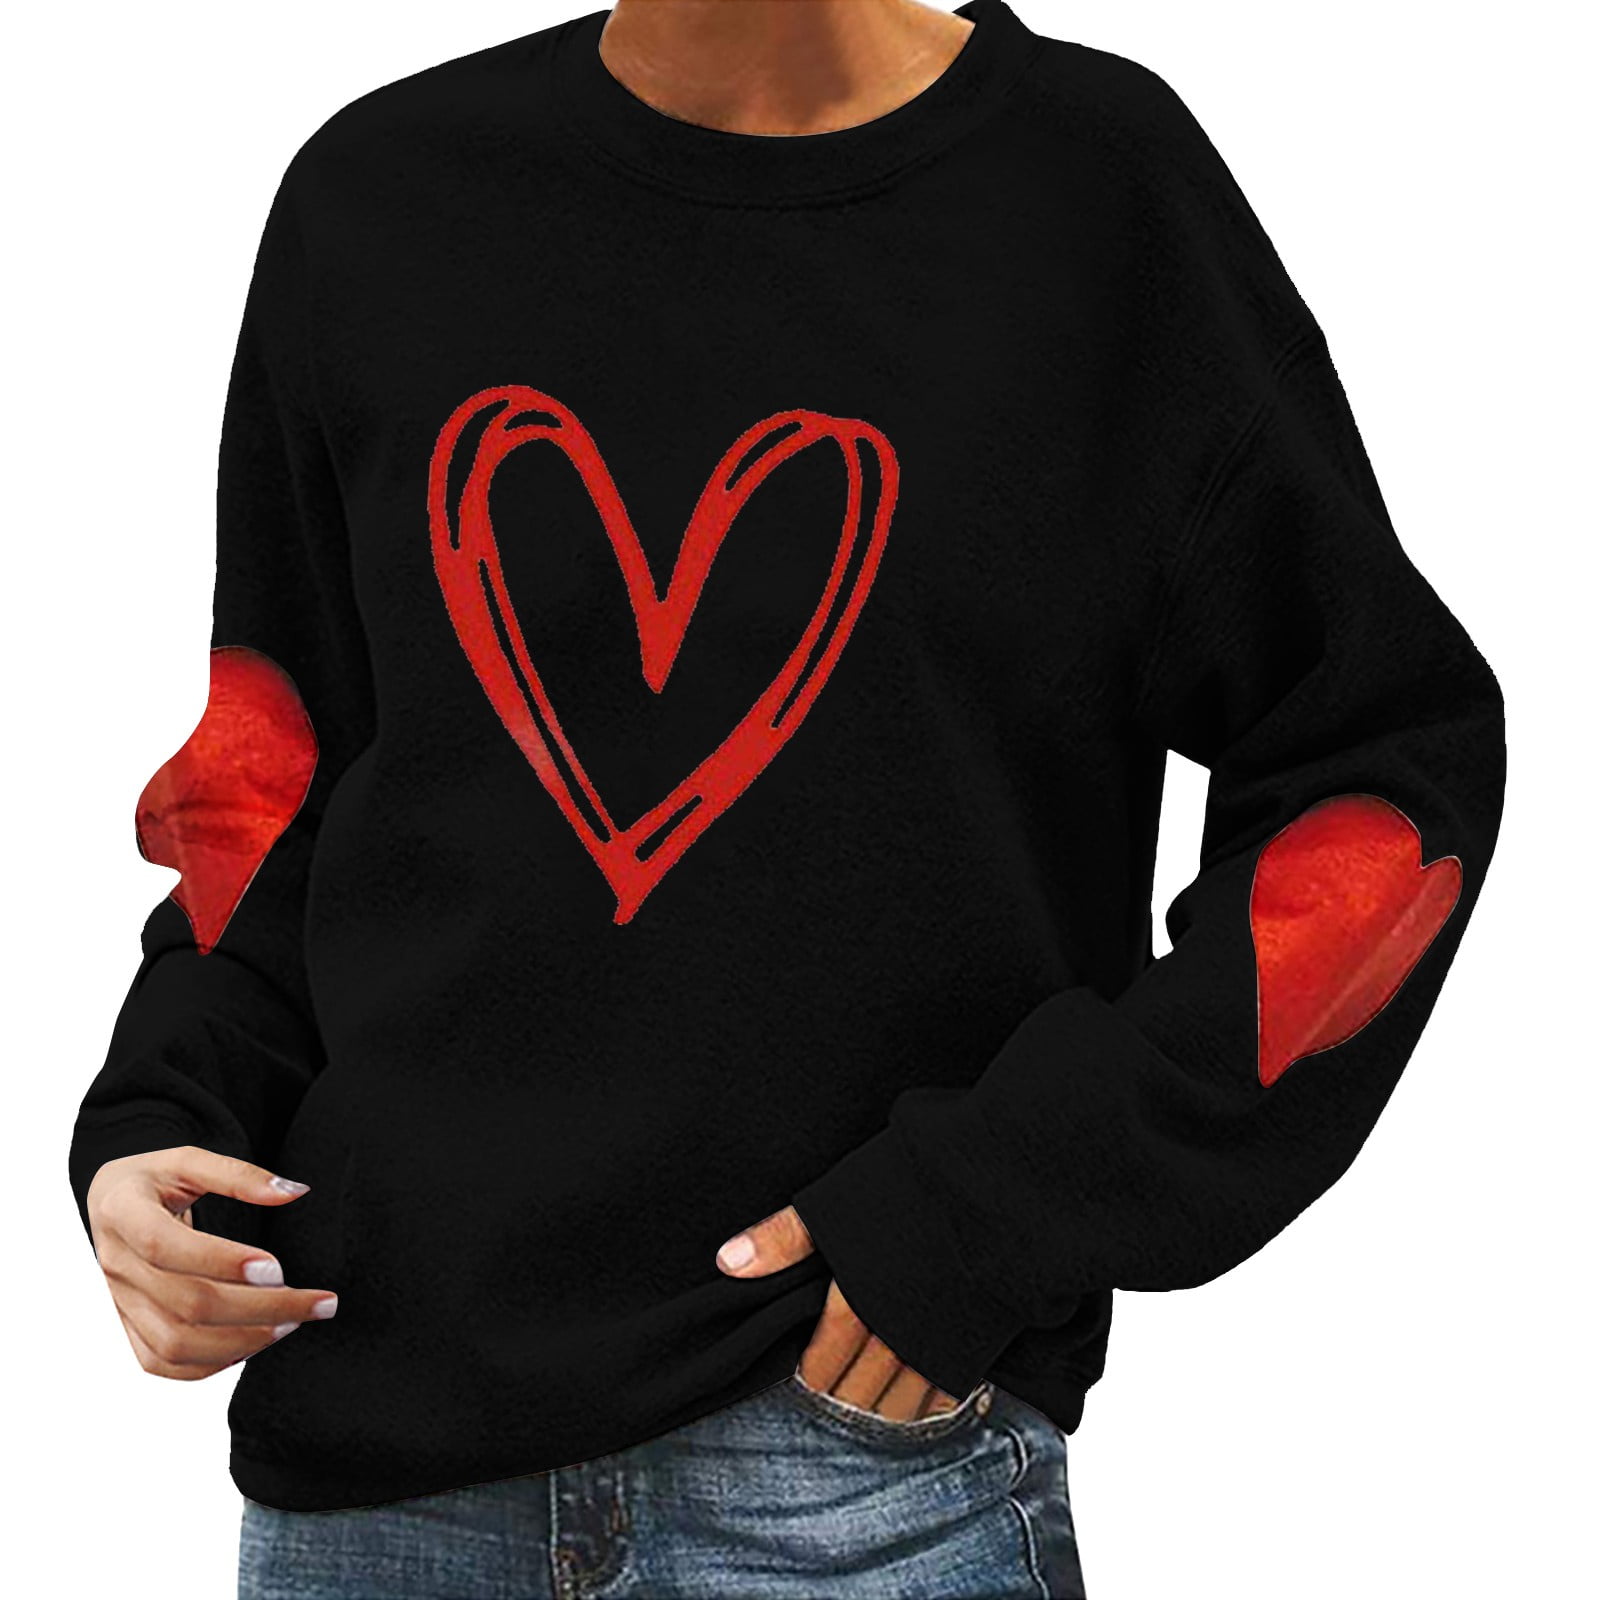 hcuribad Valentine's Shirts for Women Womens Shirts t Shirts for Women ...